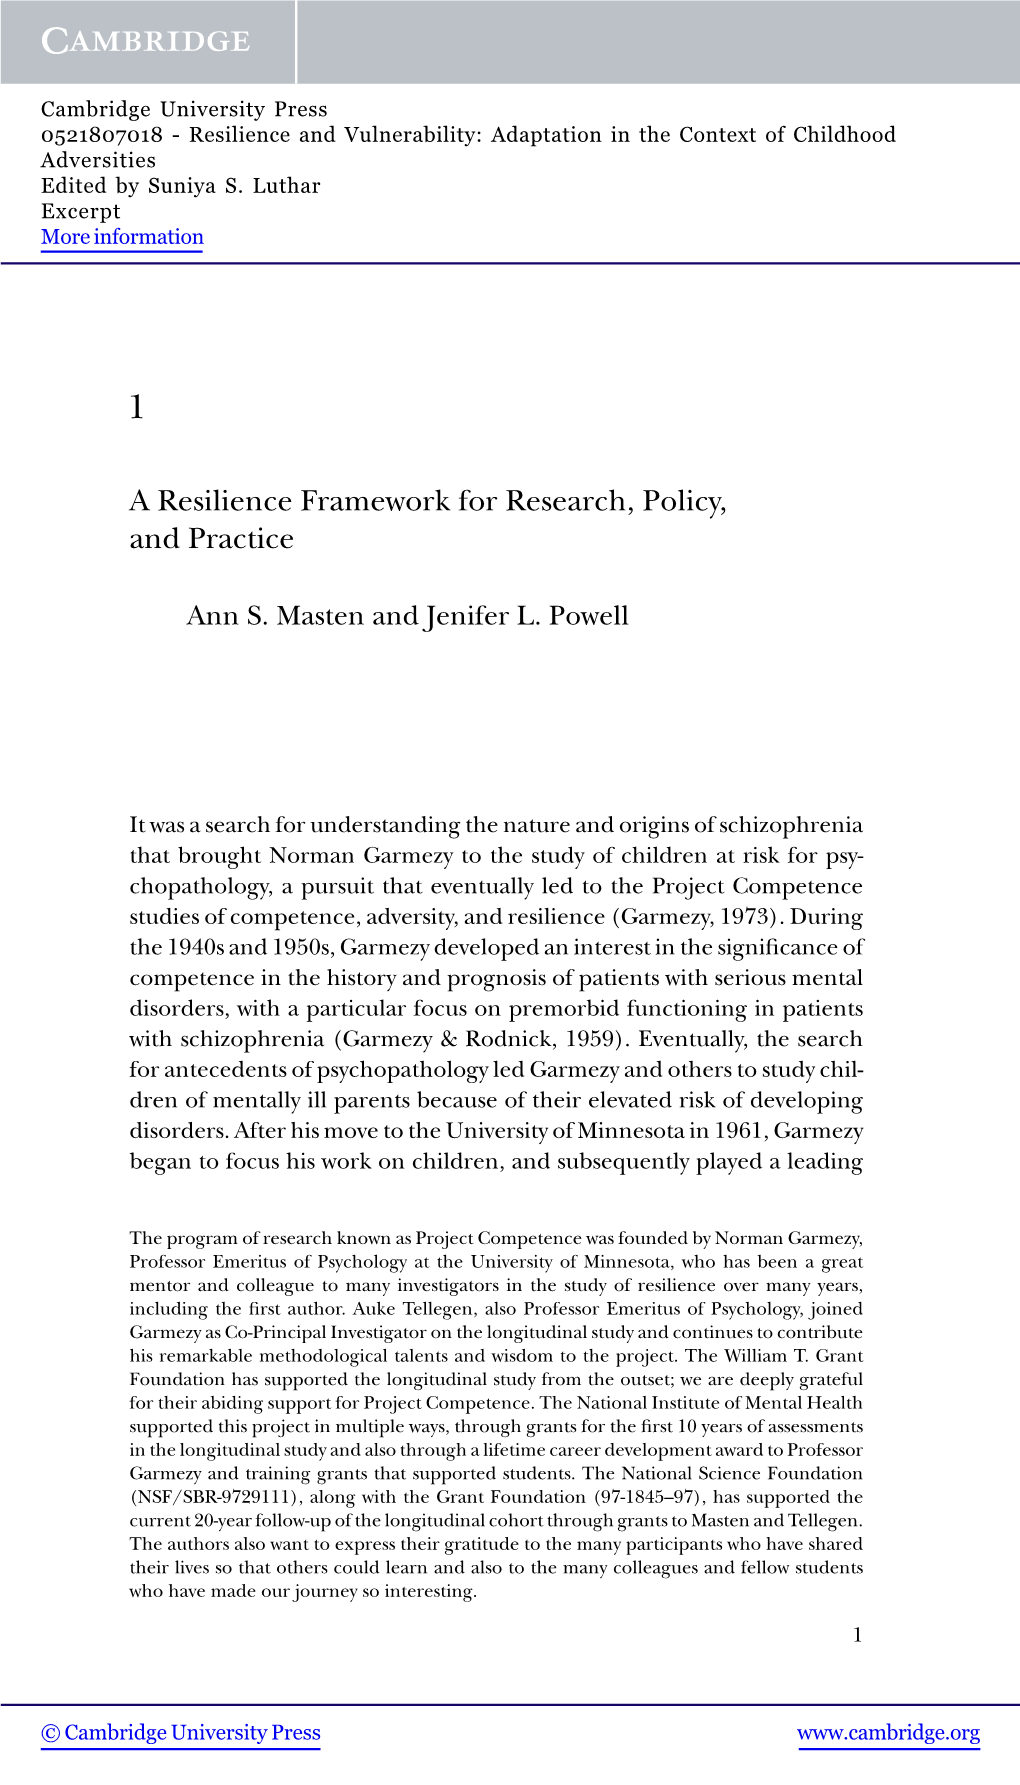 A Resilience Framework for Research, Policy, and Practice